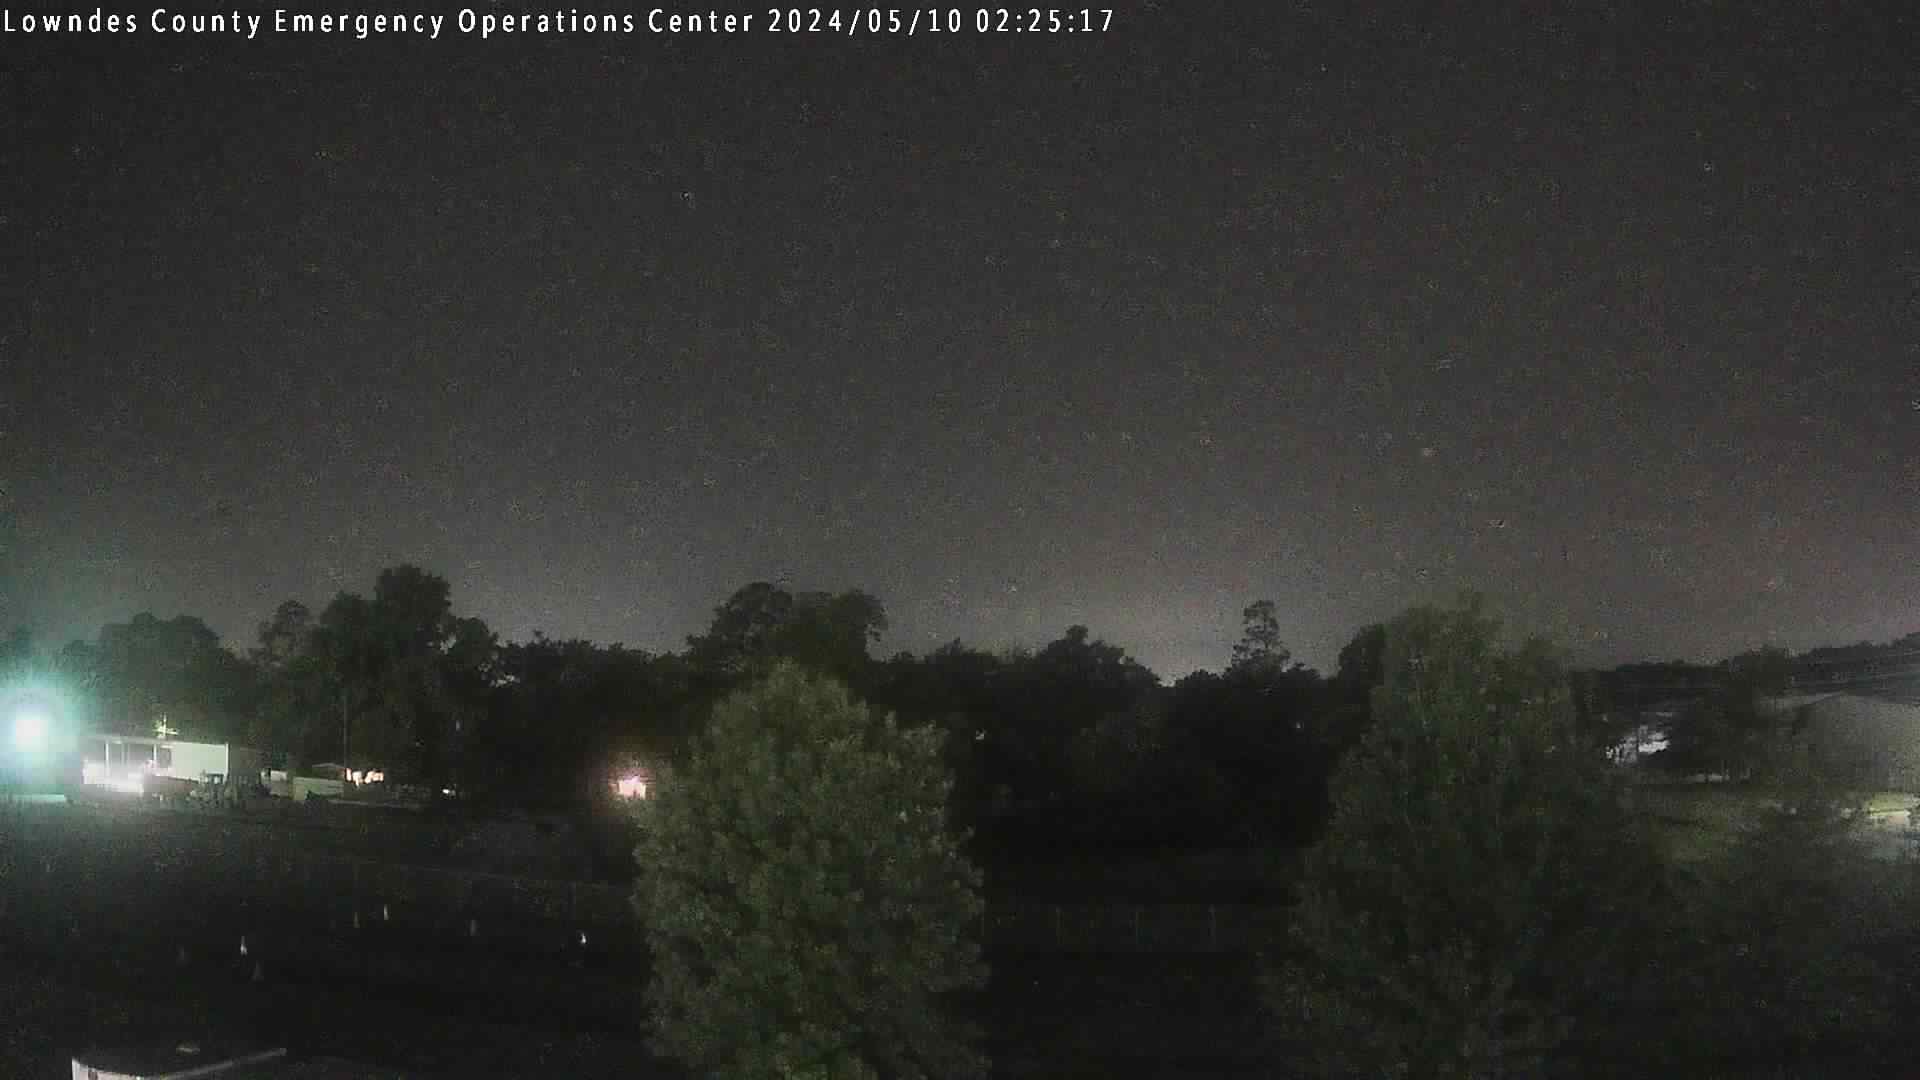  WeatherSTEM Cloud Camera LowndesEOCWx in Lowndes County, Georgia GA at Lowndes County Emergency Operations Center